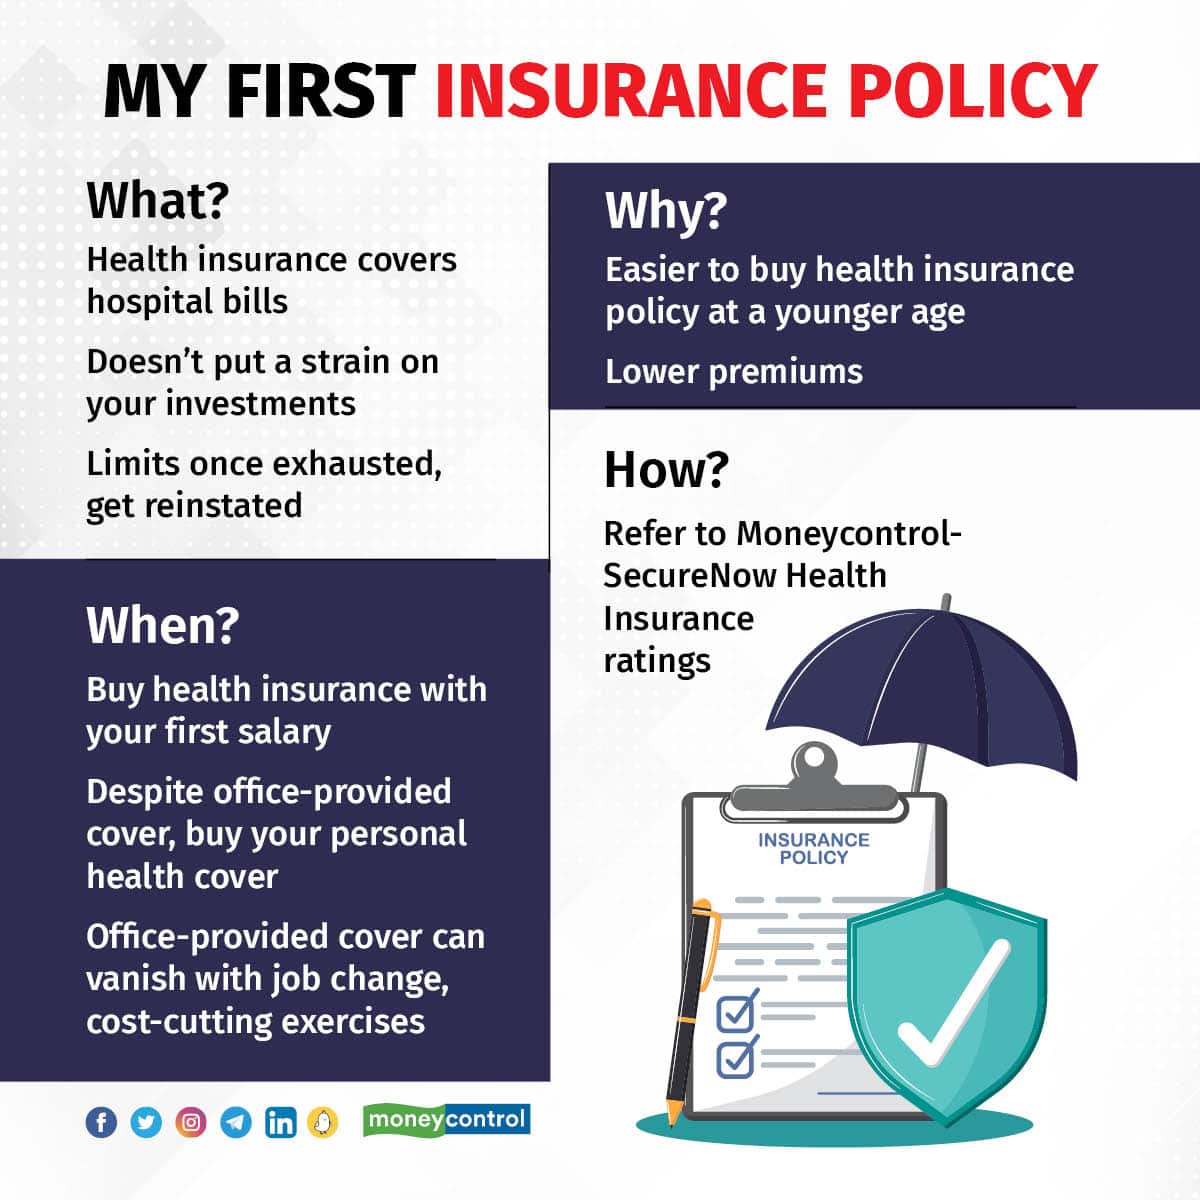 first%20insurance%20policy%200212_001